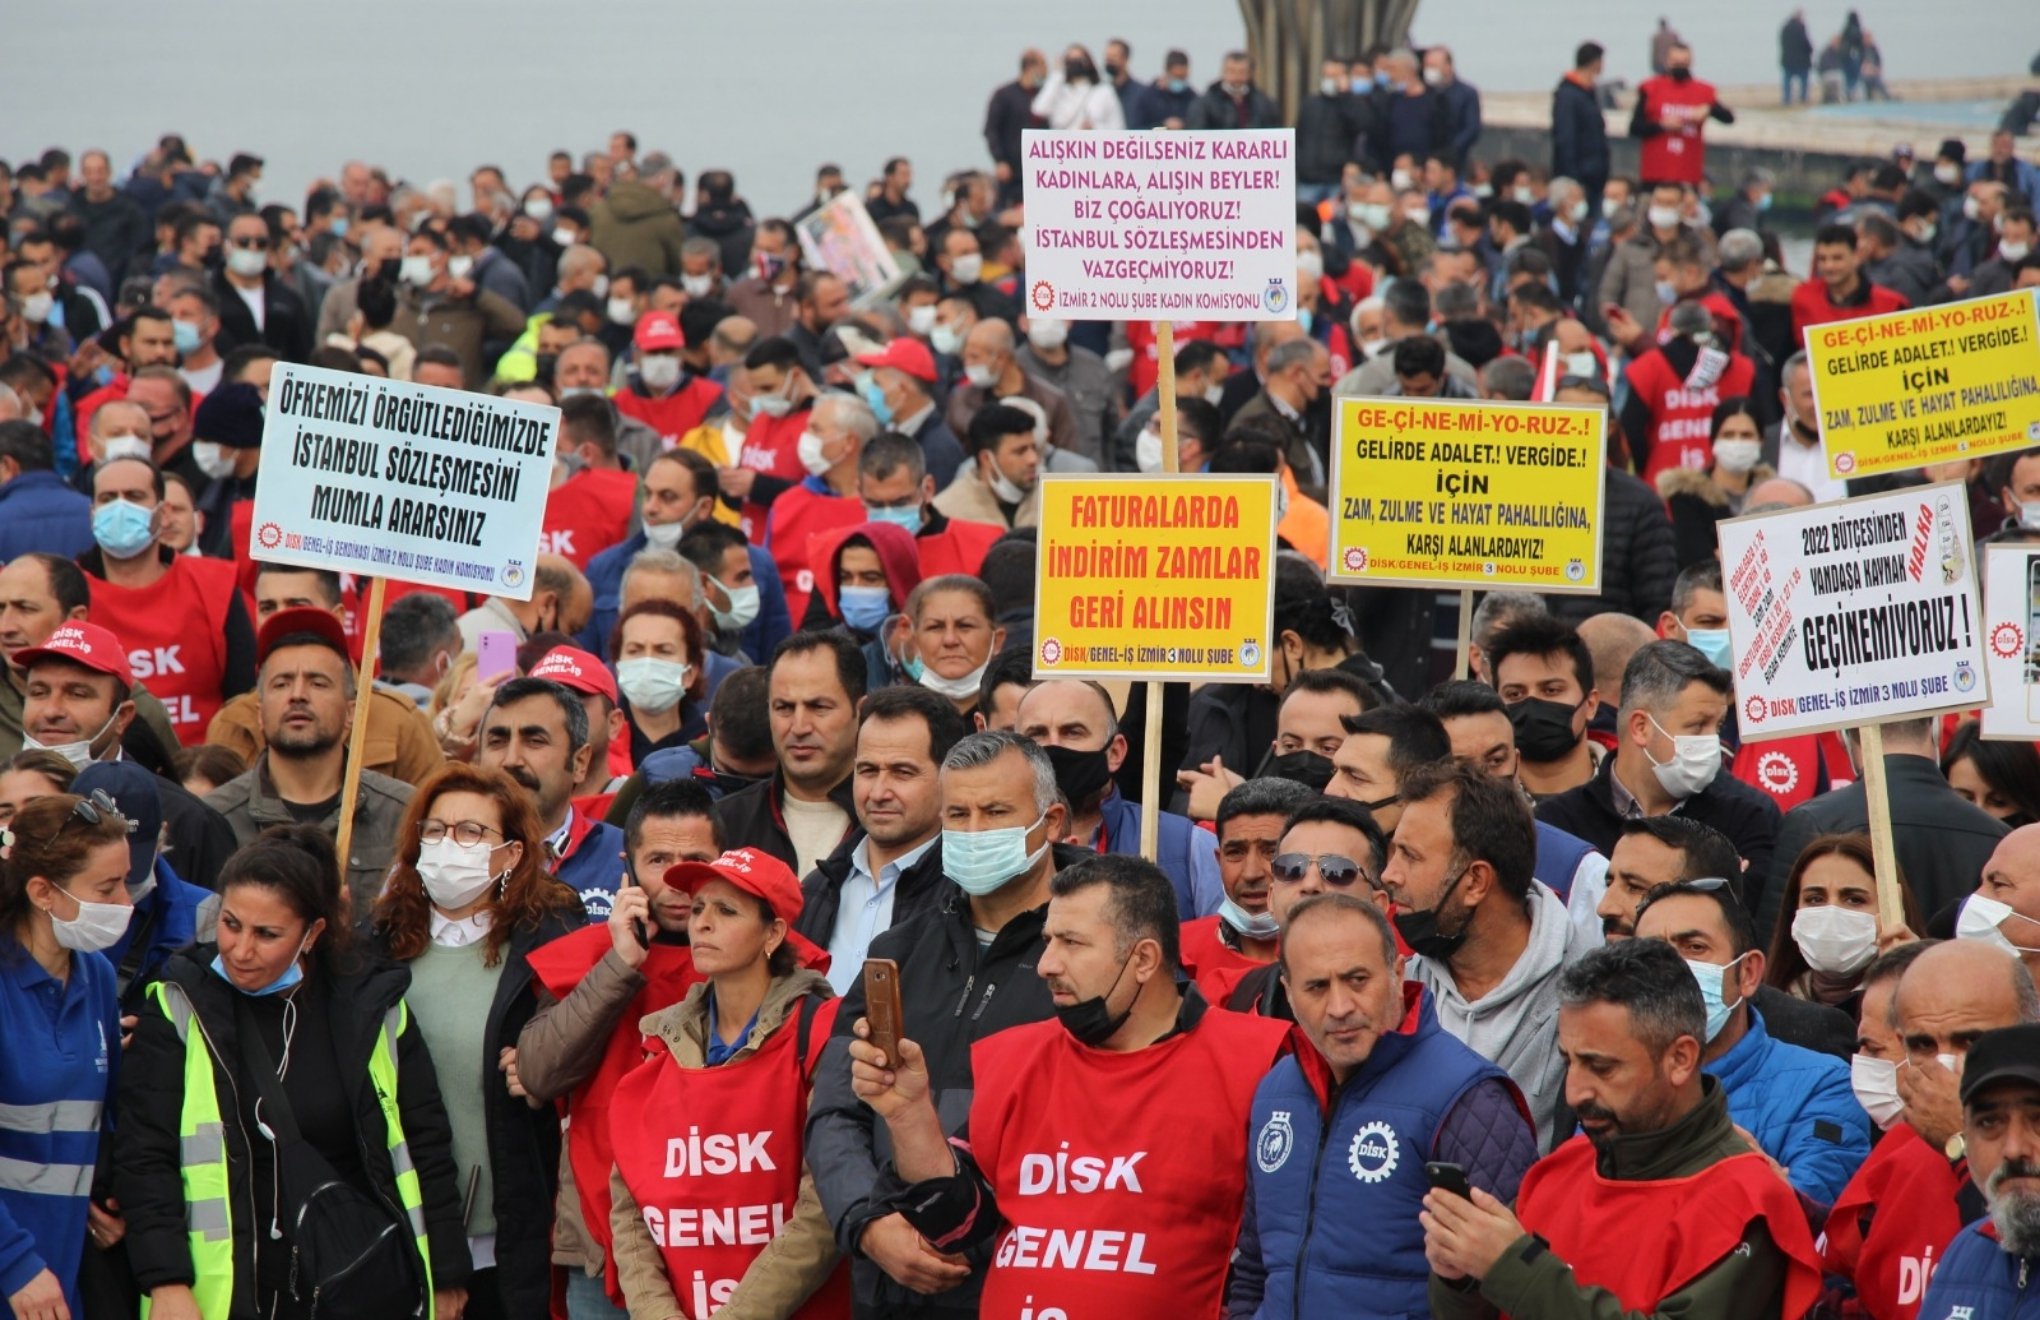 ‘We cannot make ends meet’: Workers take to the streets in İzmir